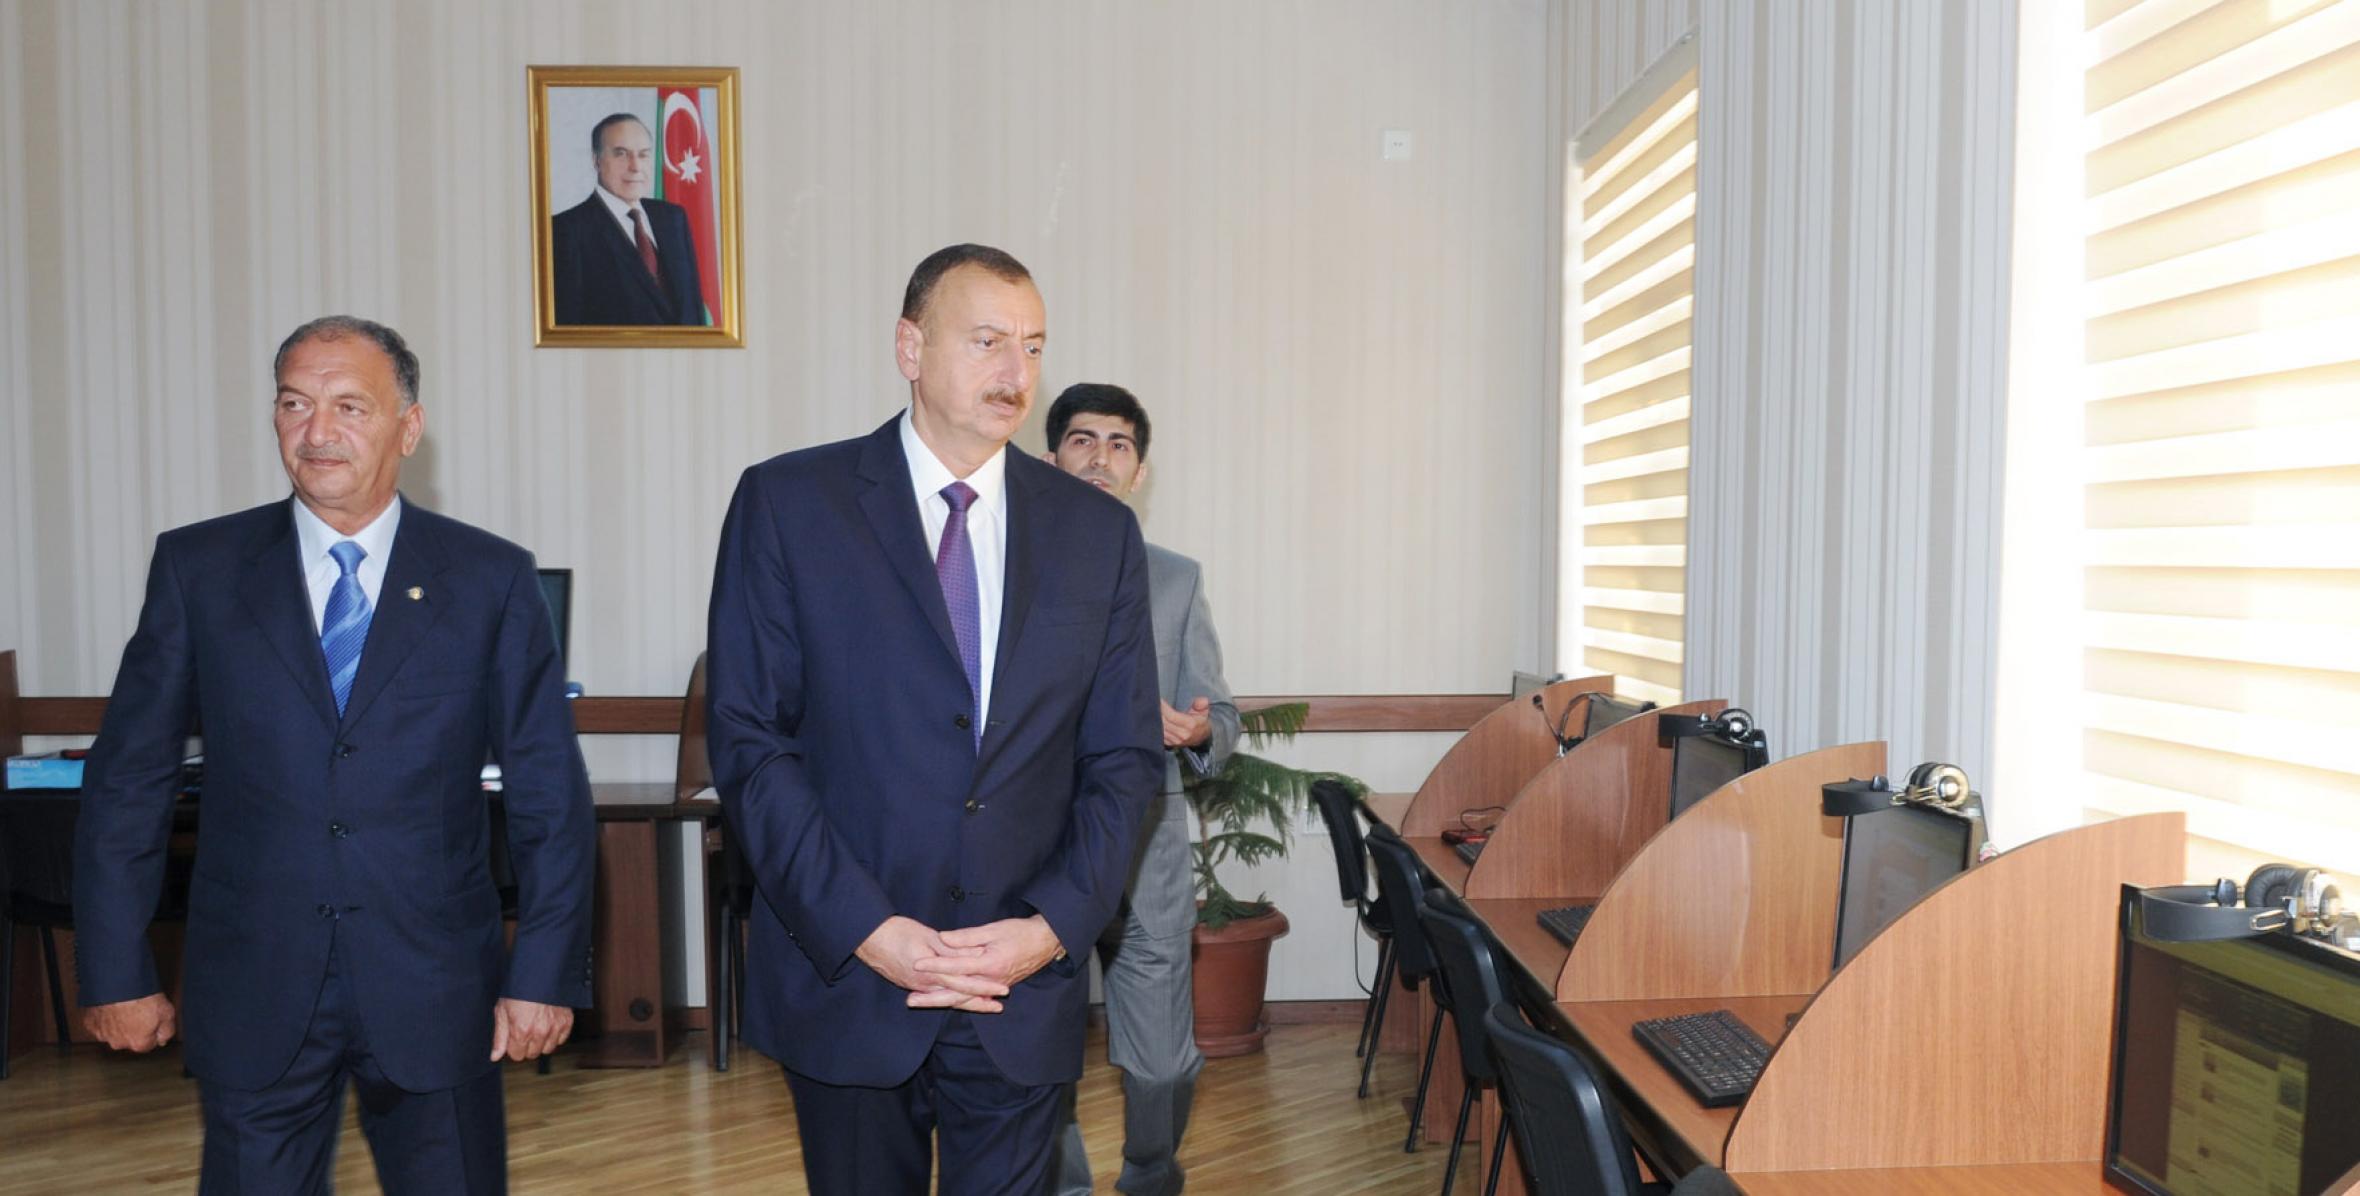 Ilham Aliyev attended the opening of a regional information center